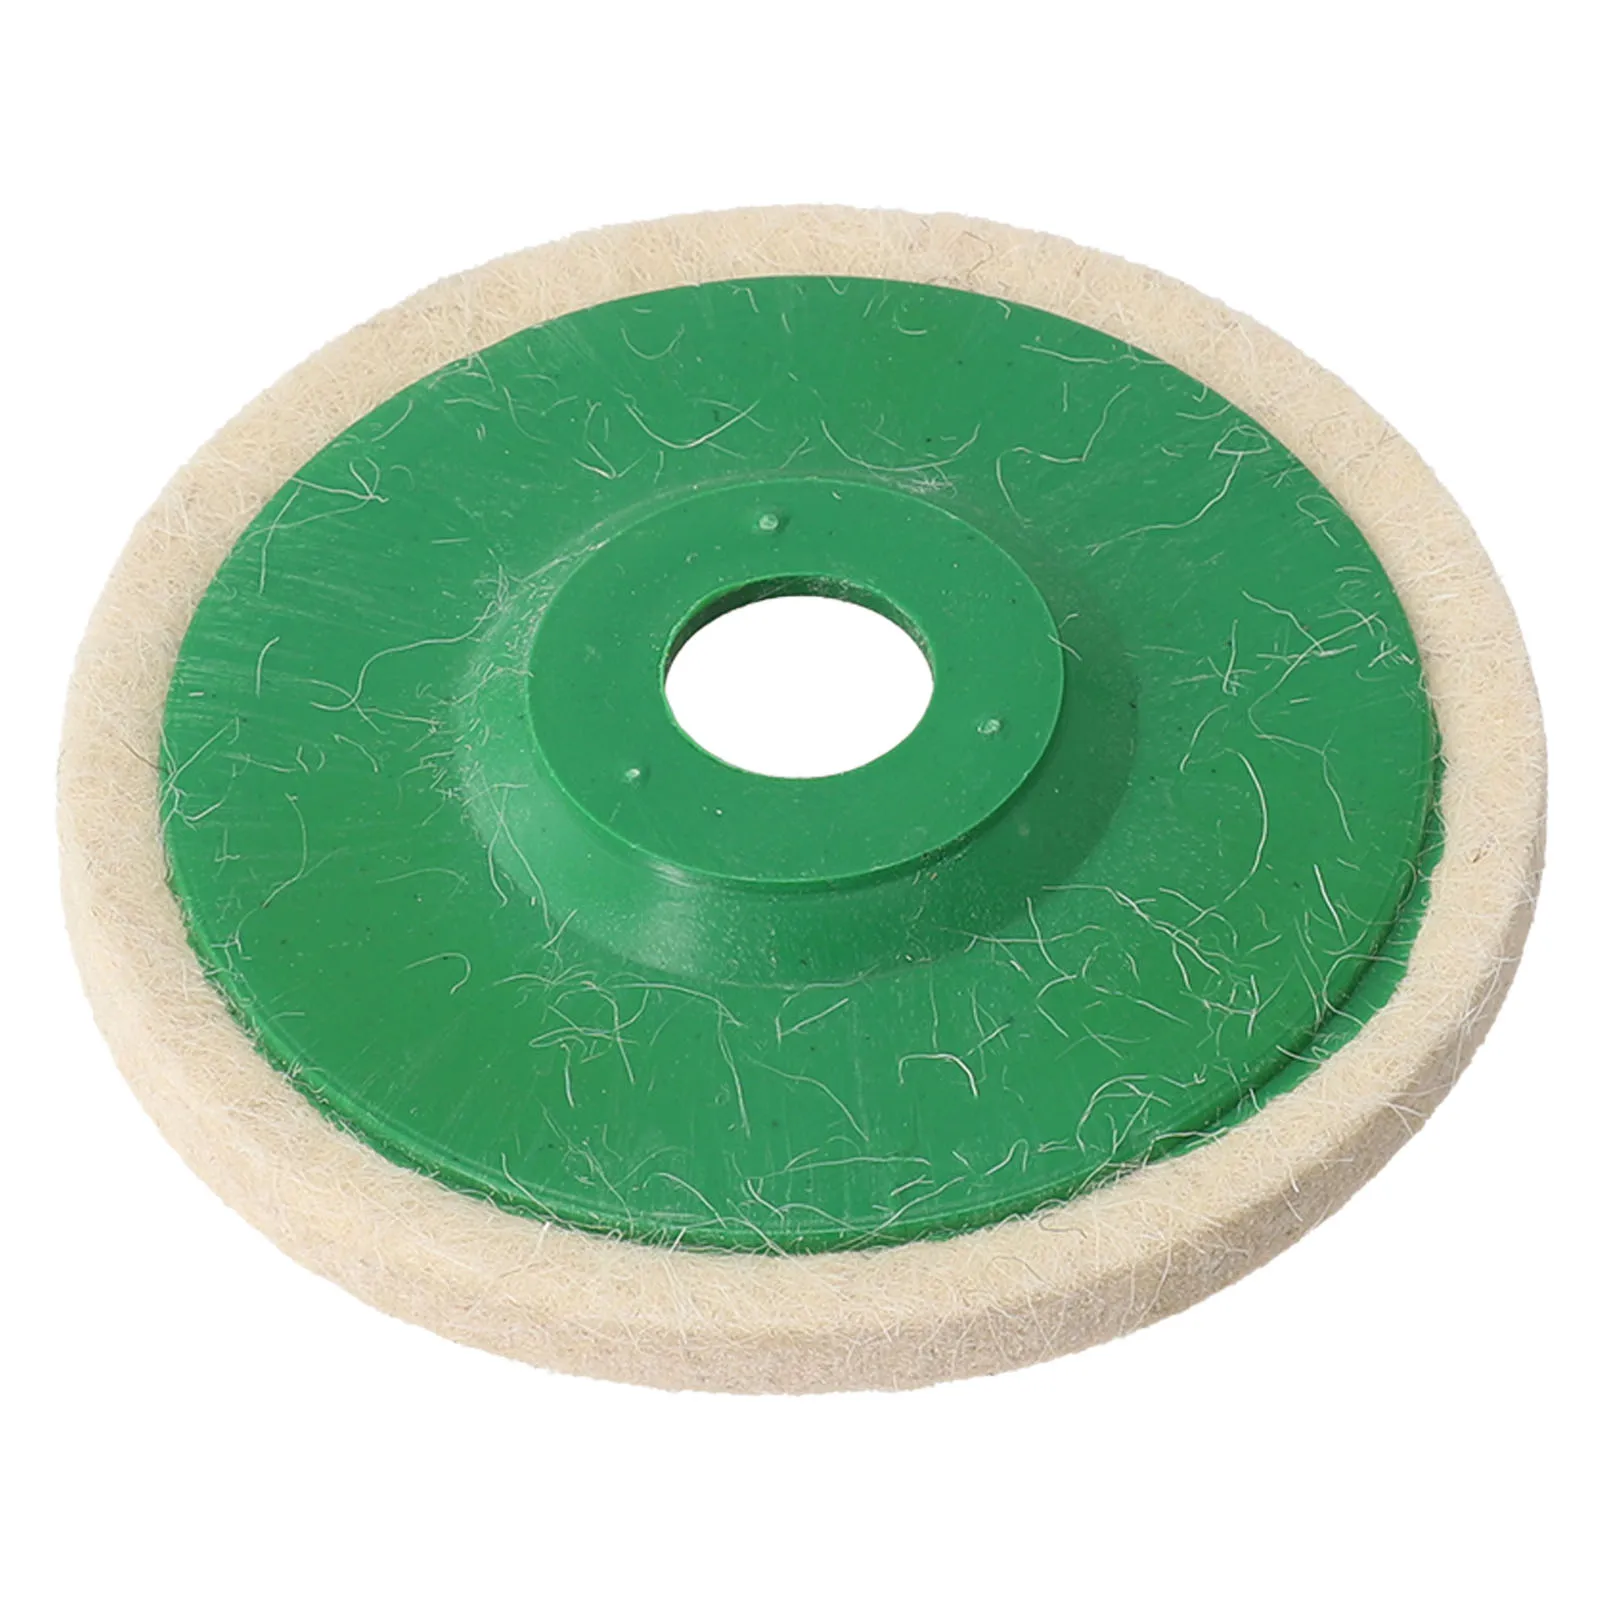 1pc Wool Felt Polishing Pads 5inch Angle Grinder Wheel Felt Polishing Pad Disc For Metal Marble Glass Ceramics Power Tool Parts double headed scribe pens scribing engraving etching pen diy engraver etcher tool kit for metal glass ceramics jewelry scriber